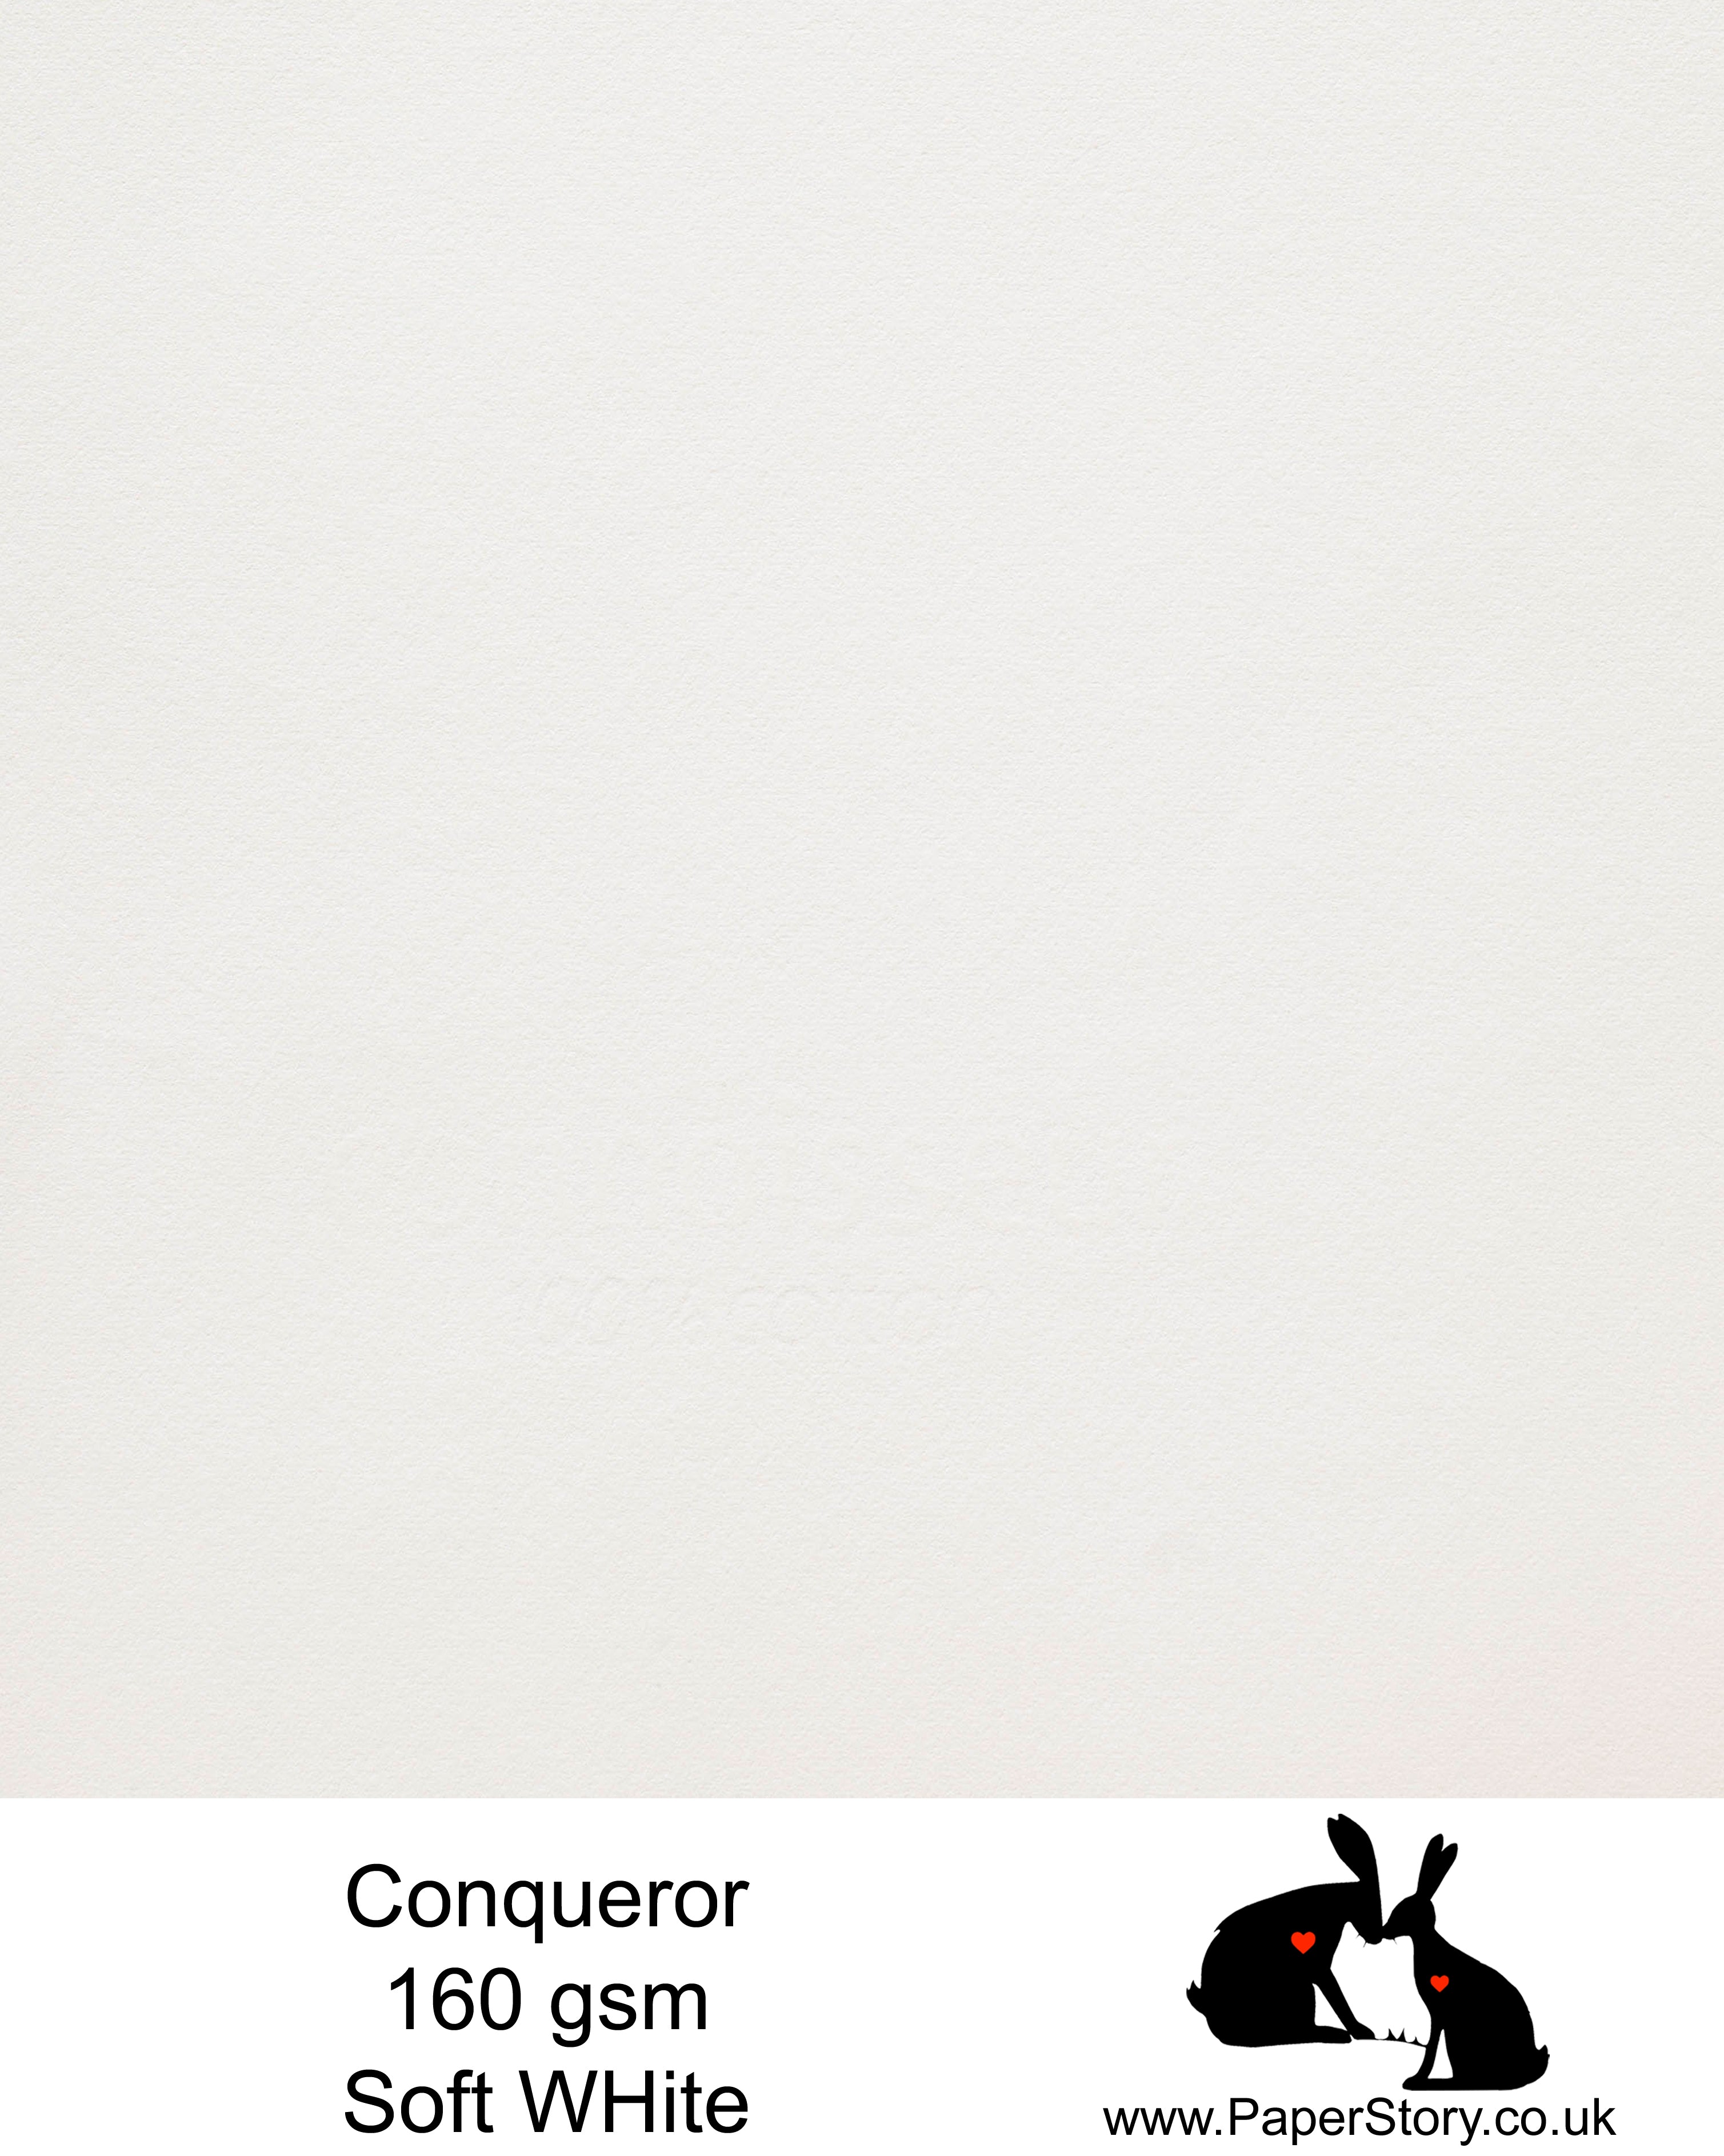 Conqueror 100% Cotton paper 160 gsm, soft white. This 100 % Cotton tree free, smooth soft white paper is ideal for printing, Papercutting, plus brush lettering calligraphy projects. The benchmark for luxury and quality